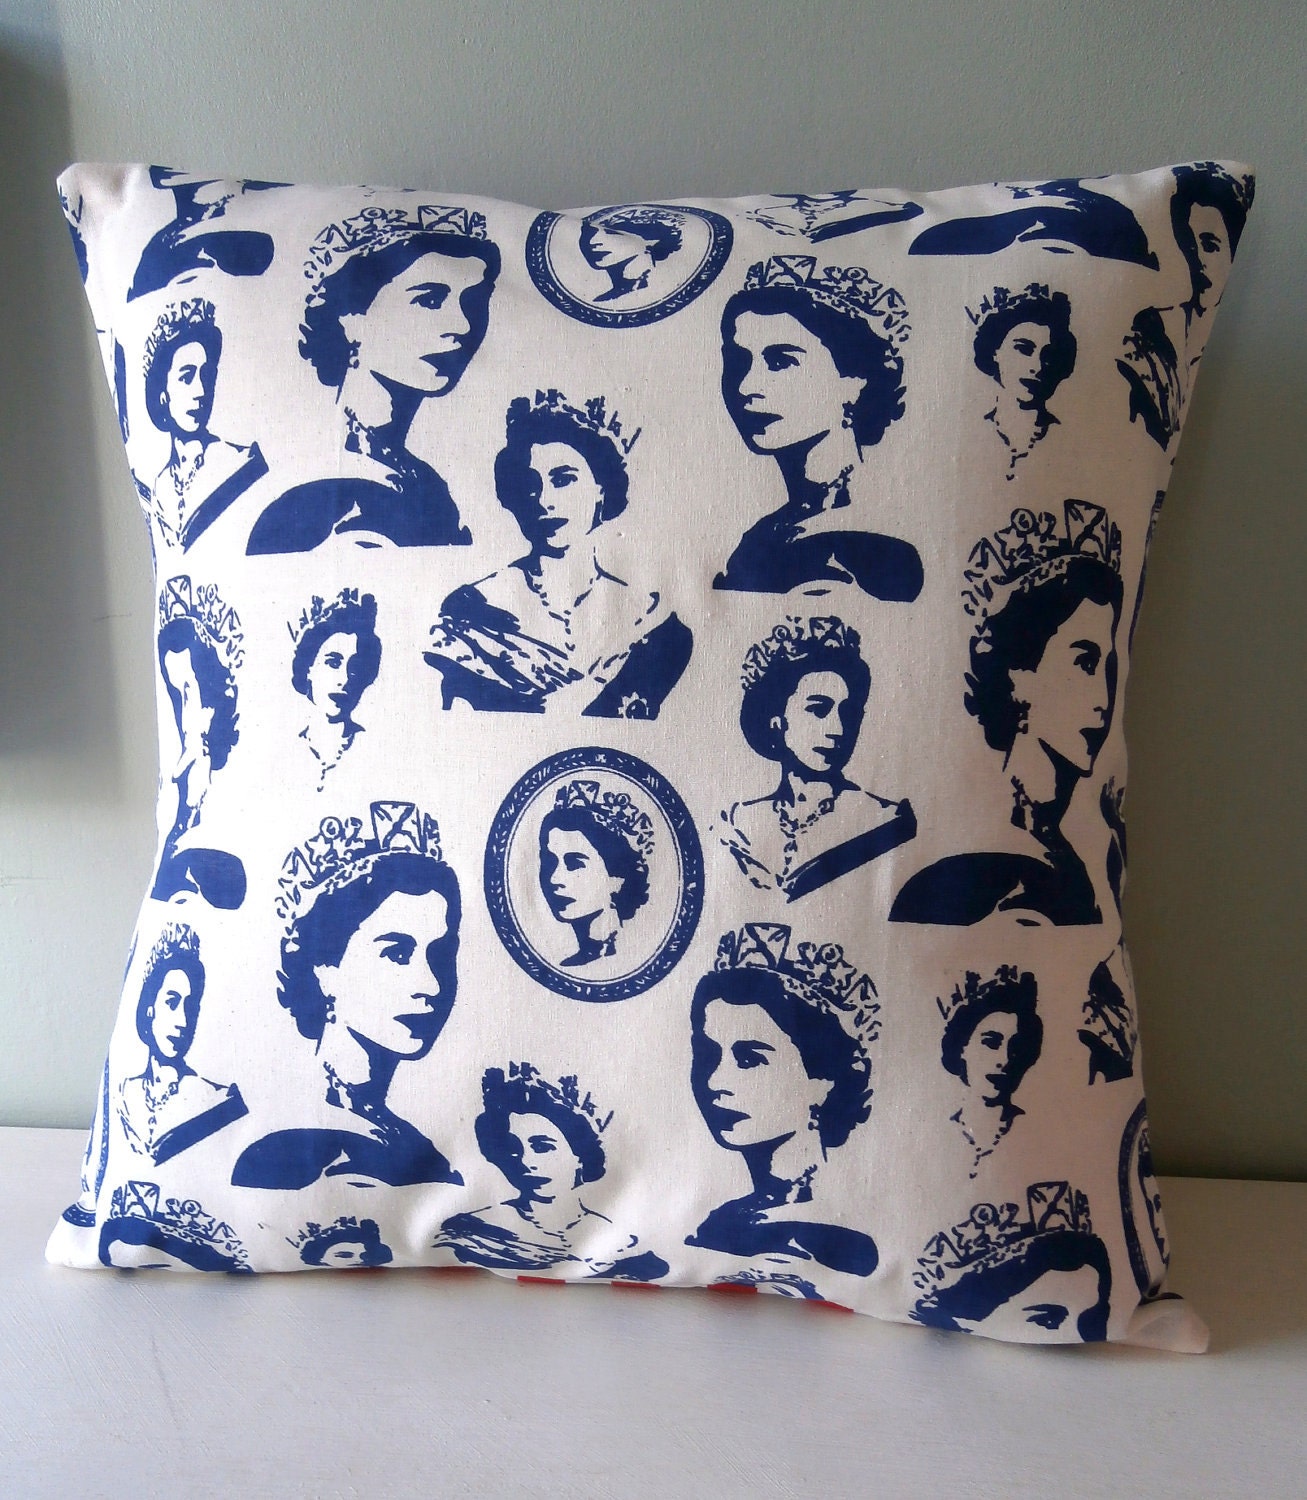 OOAK Queen Elizabeth Jubilee Cushion / Pillow cover Upcycled Teatowel - TheLuckyFox